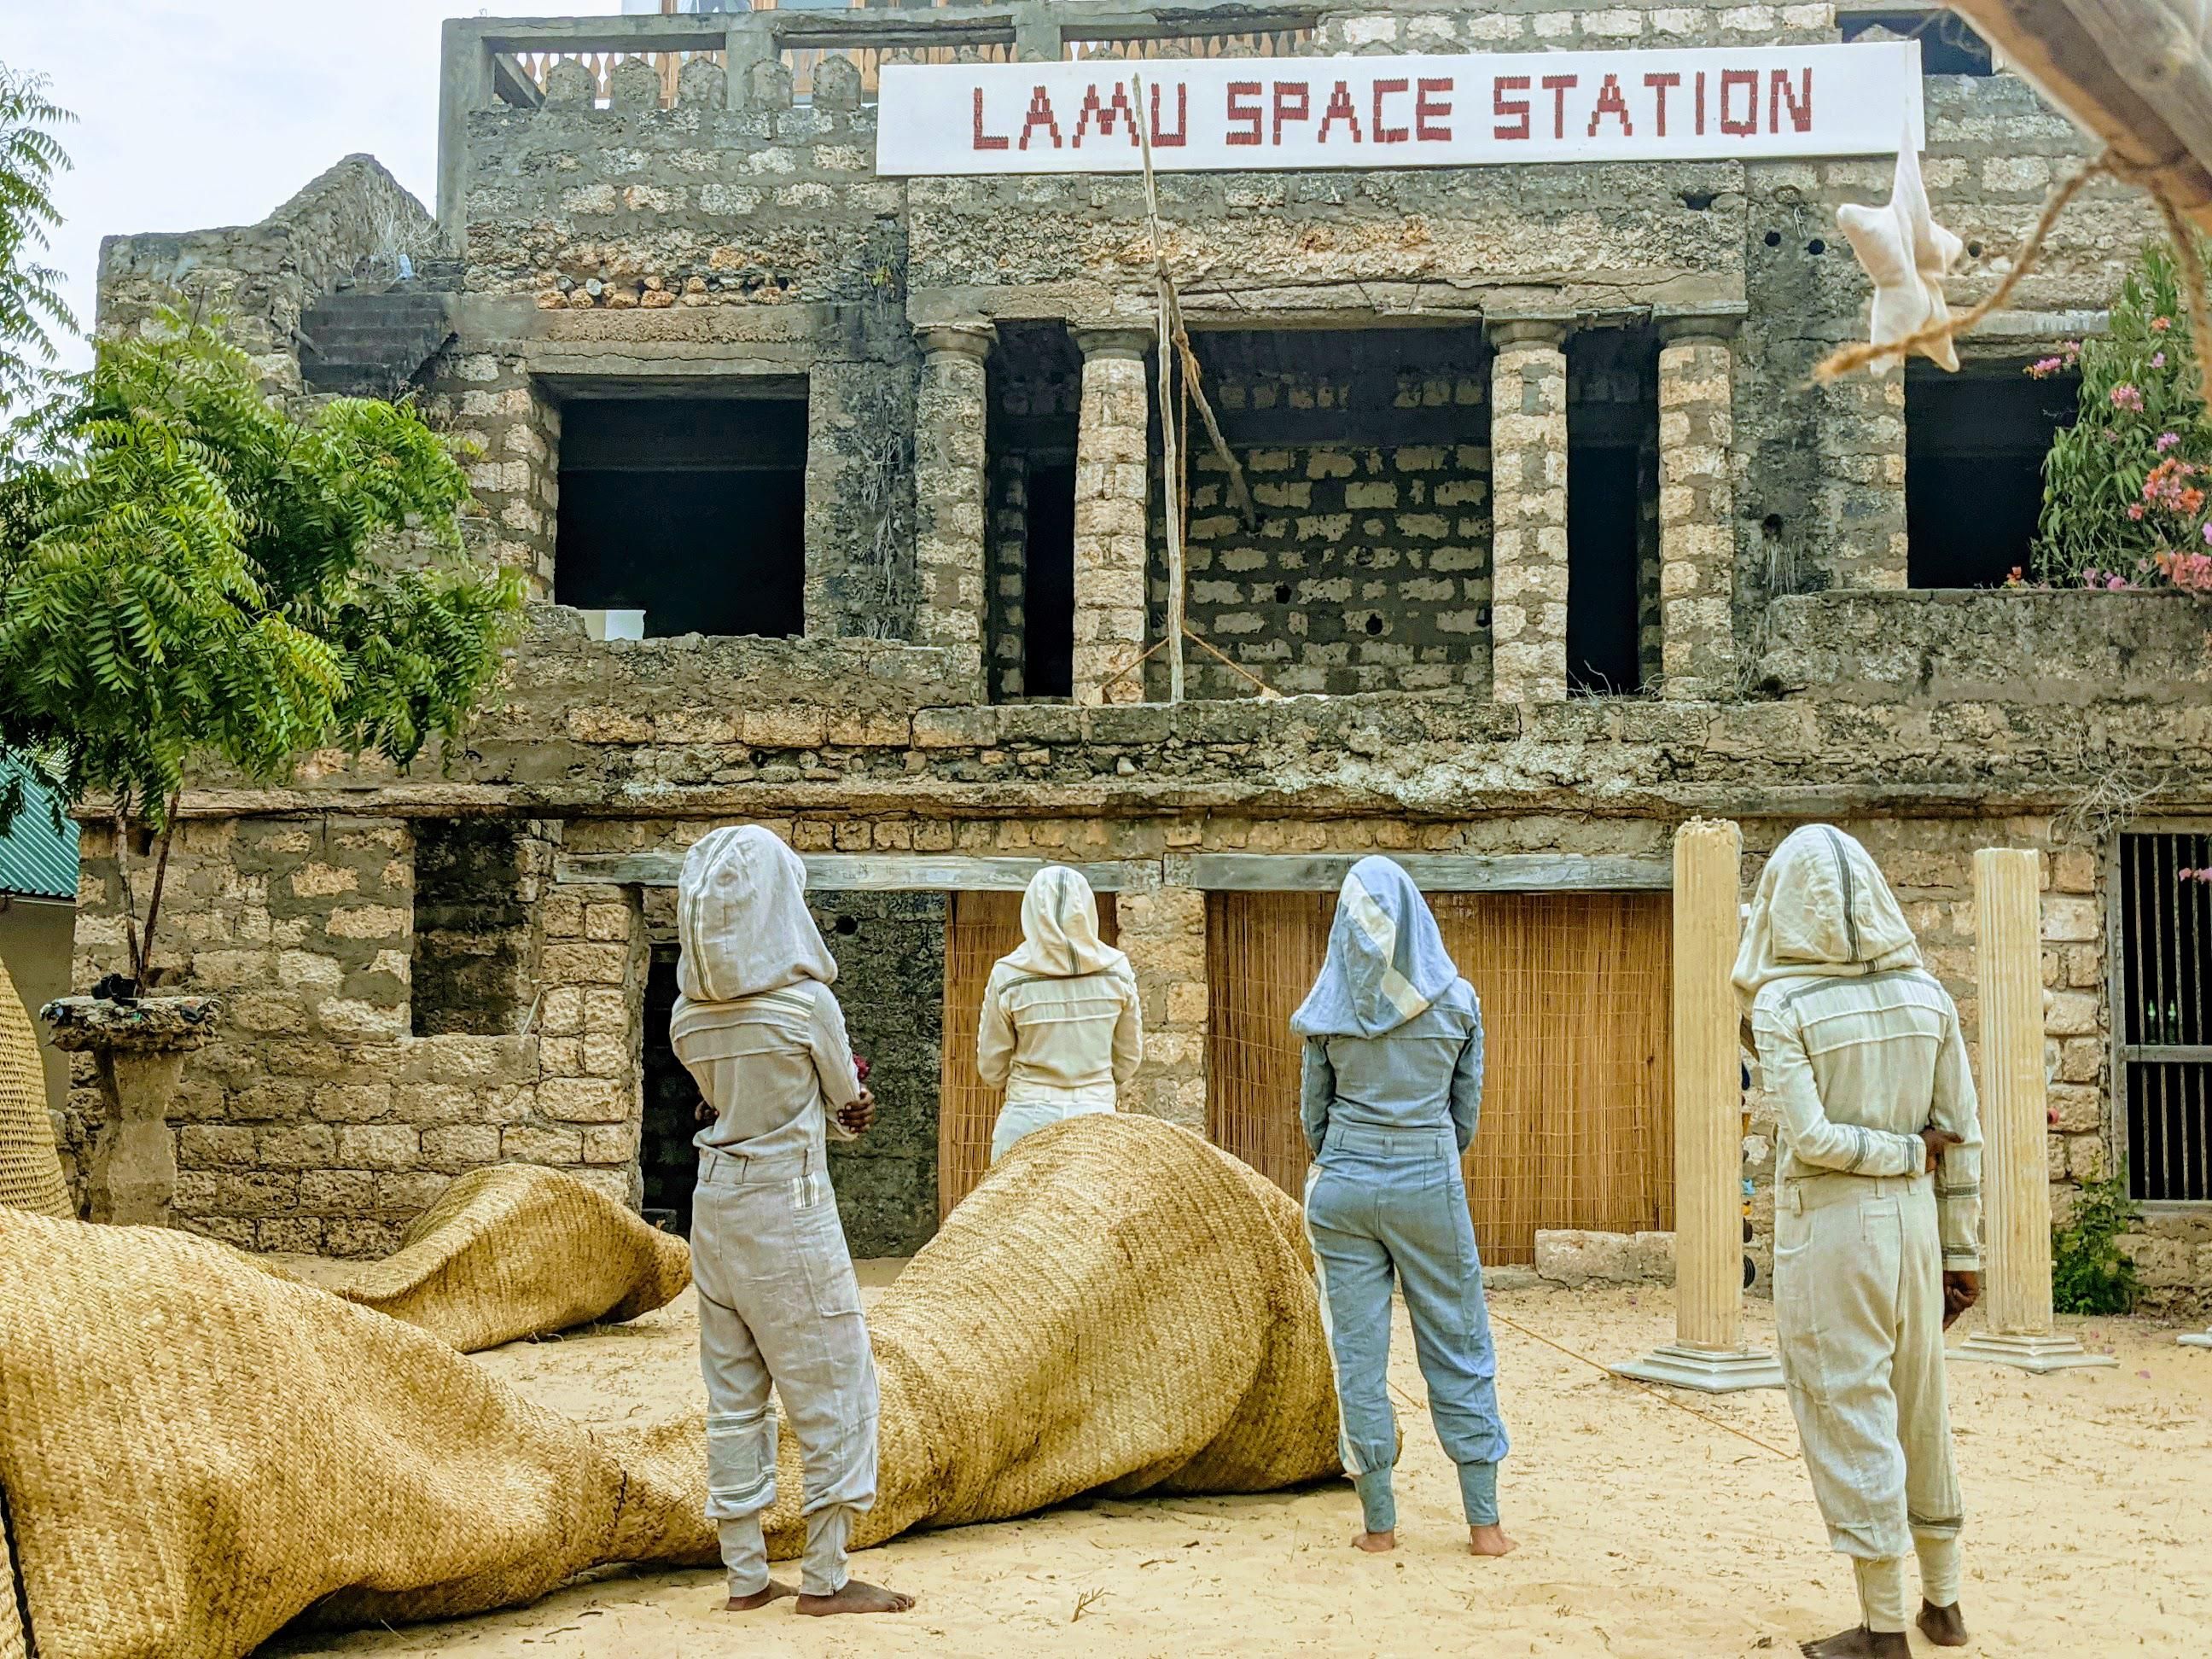 Meet the Artists of Lamu Space Station